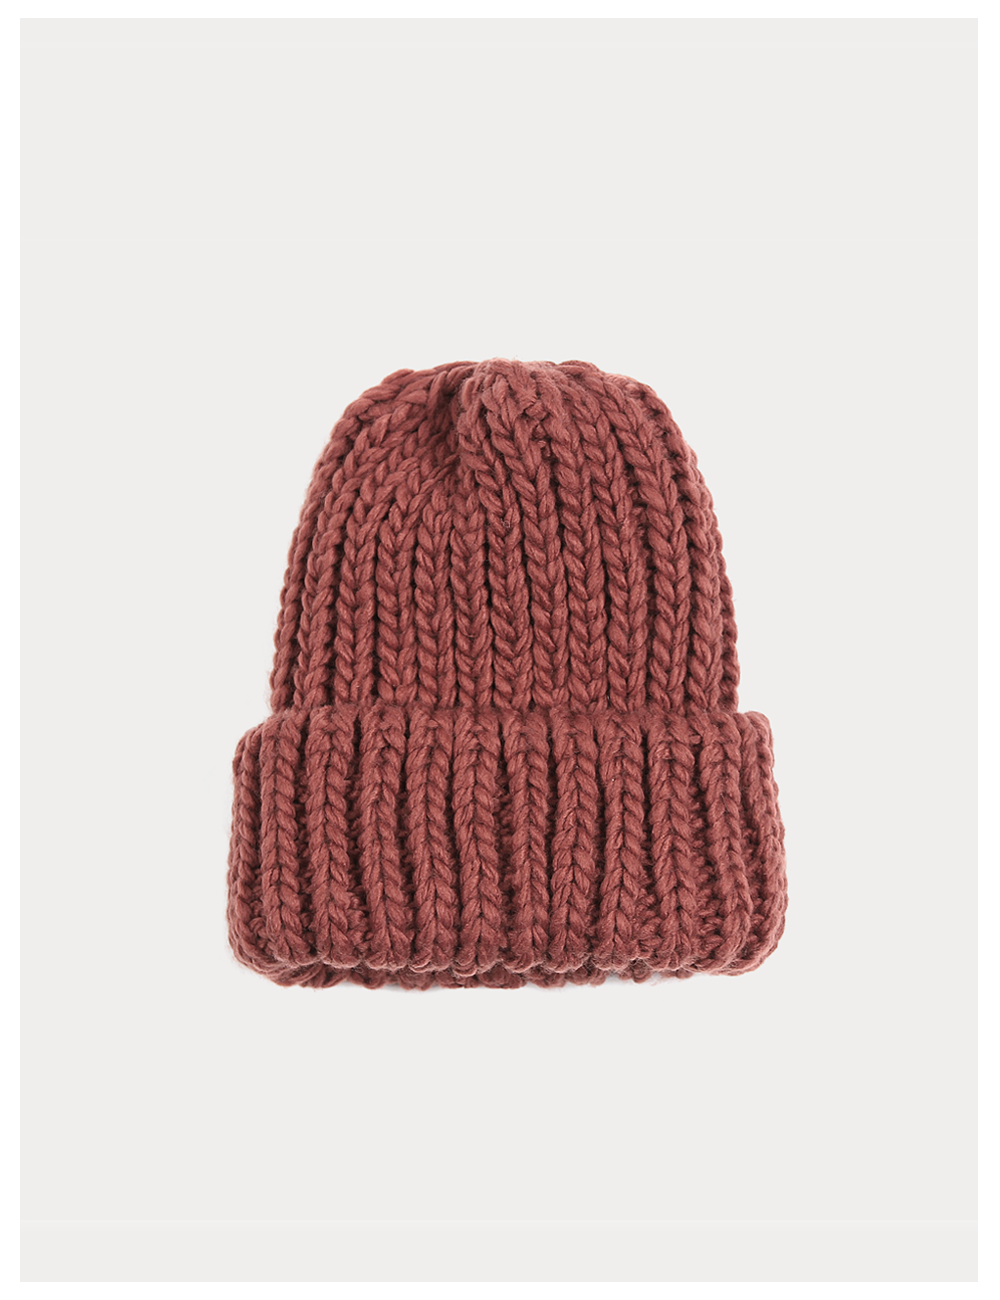 So Heavy knit Hat_Red Brown